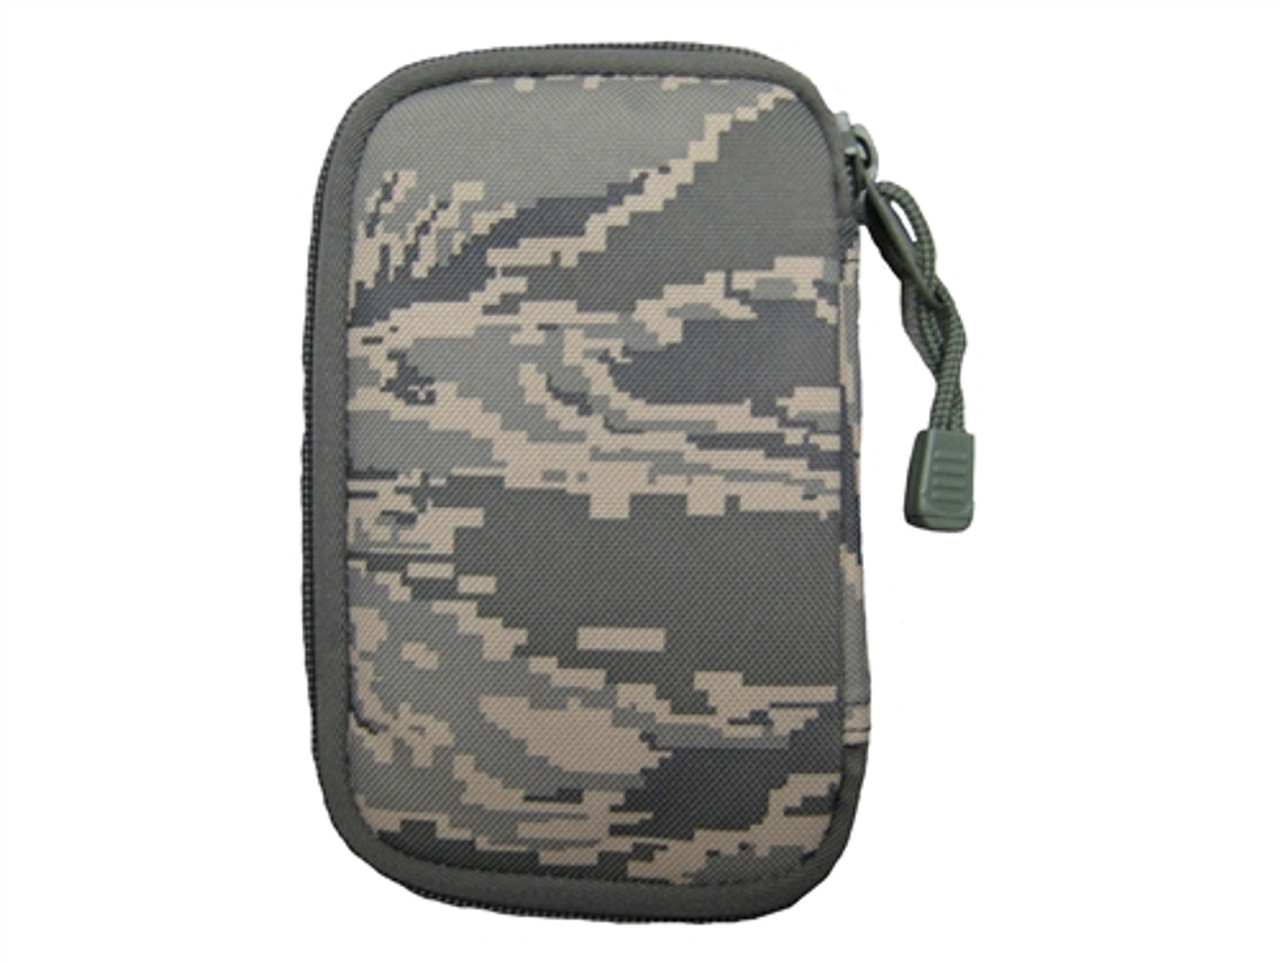 ABU Field Pad with Pen | Military Luggage